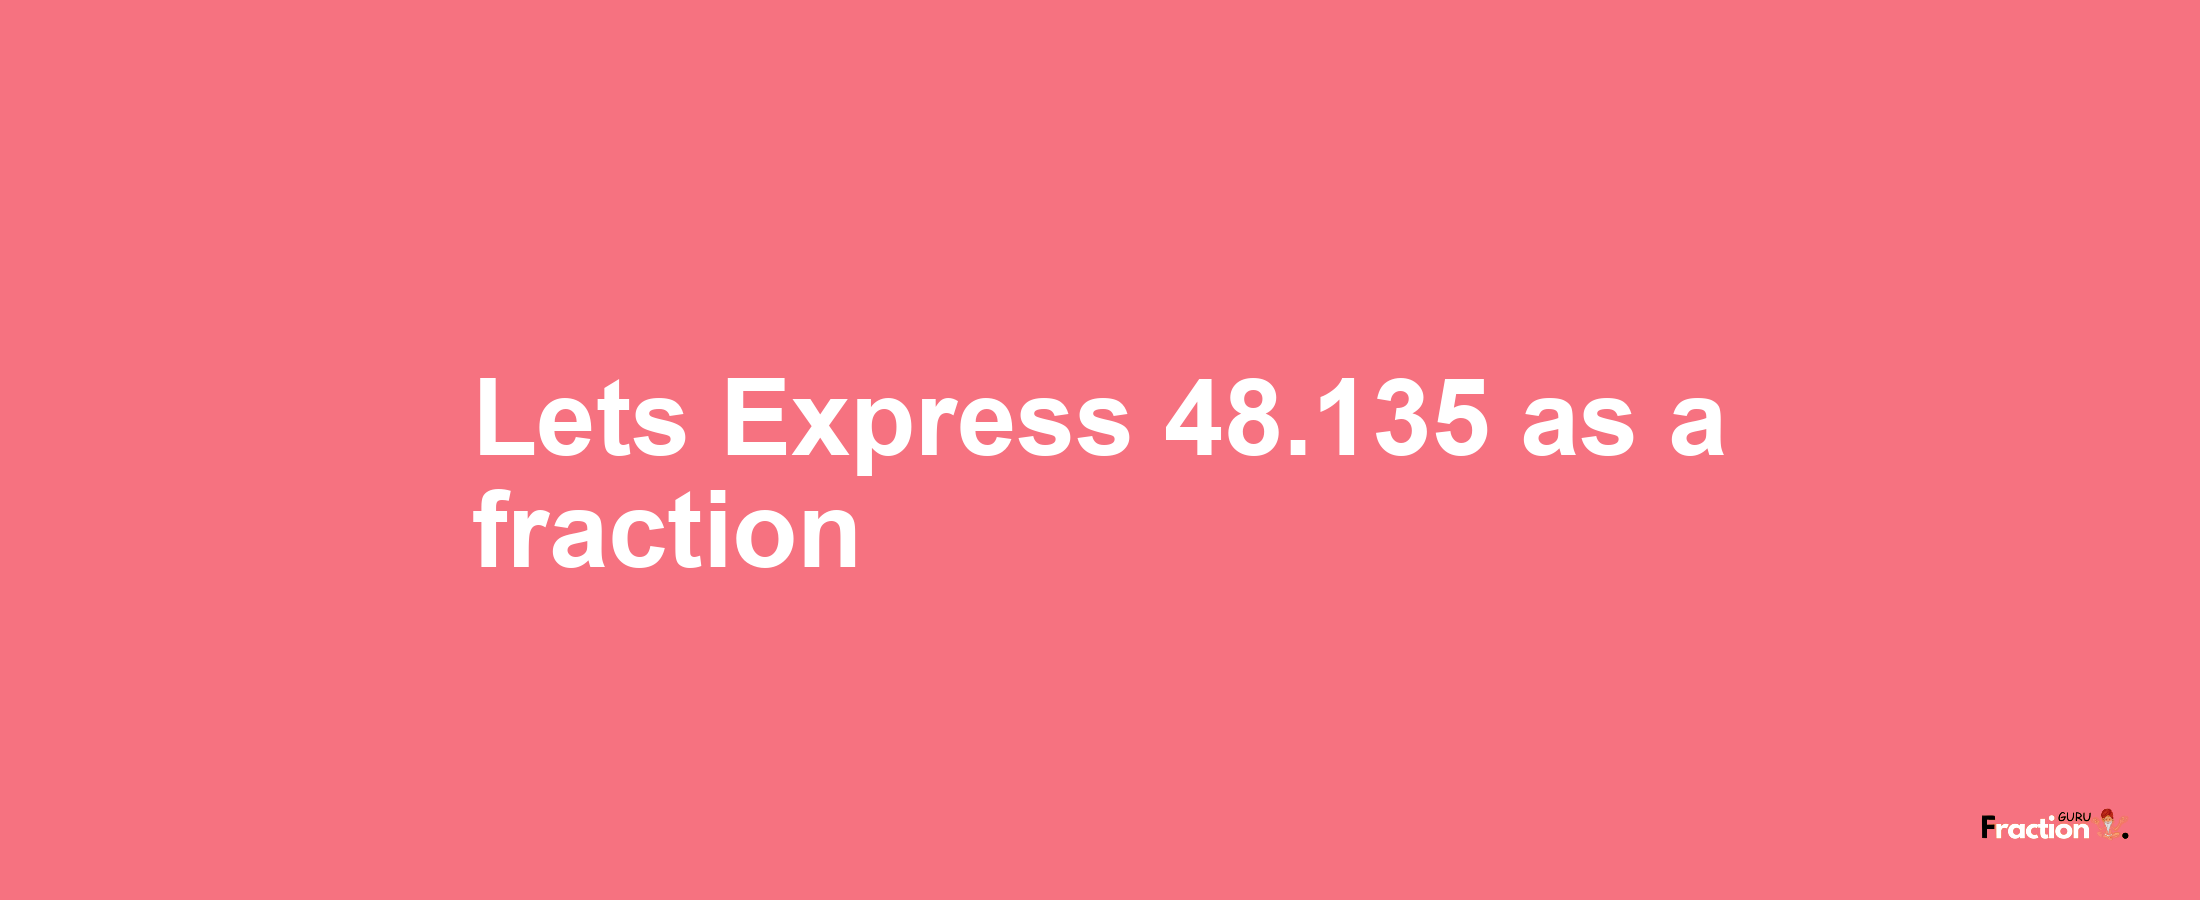 Lets Express 48.135 as afraction